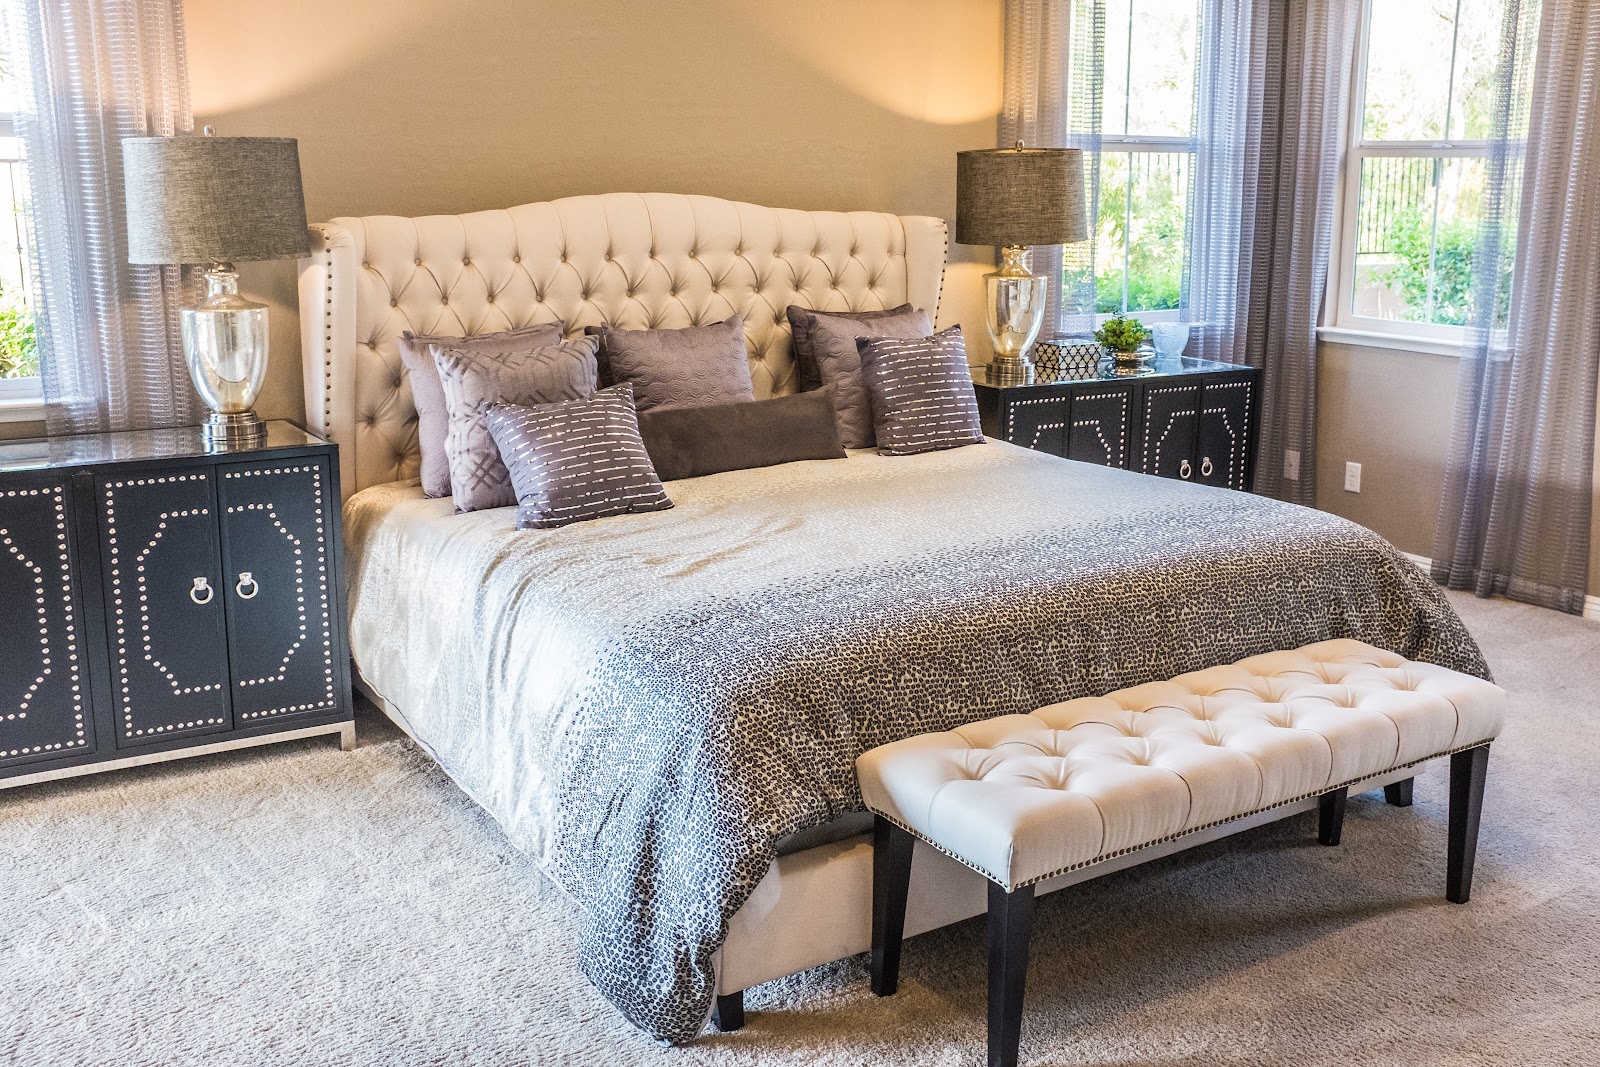 Top Ways To Make Your Bedroom a Stylish Sanctuary